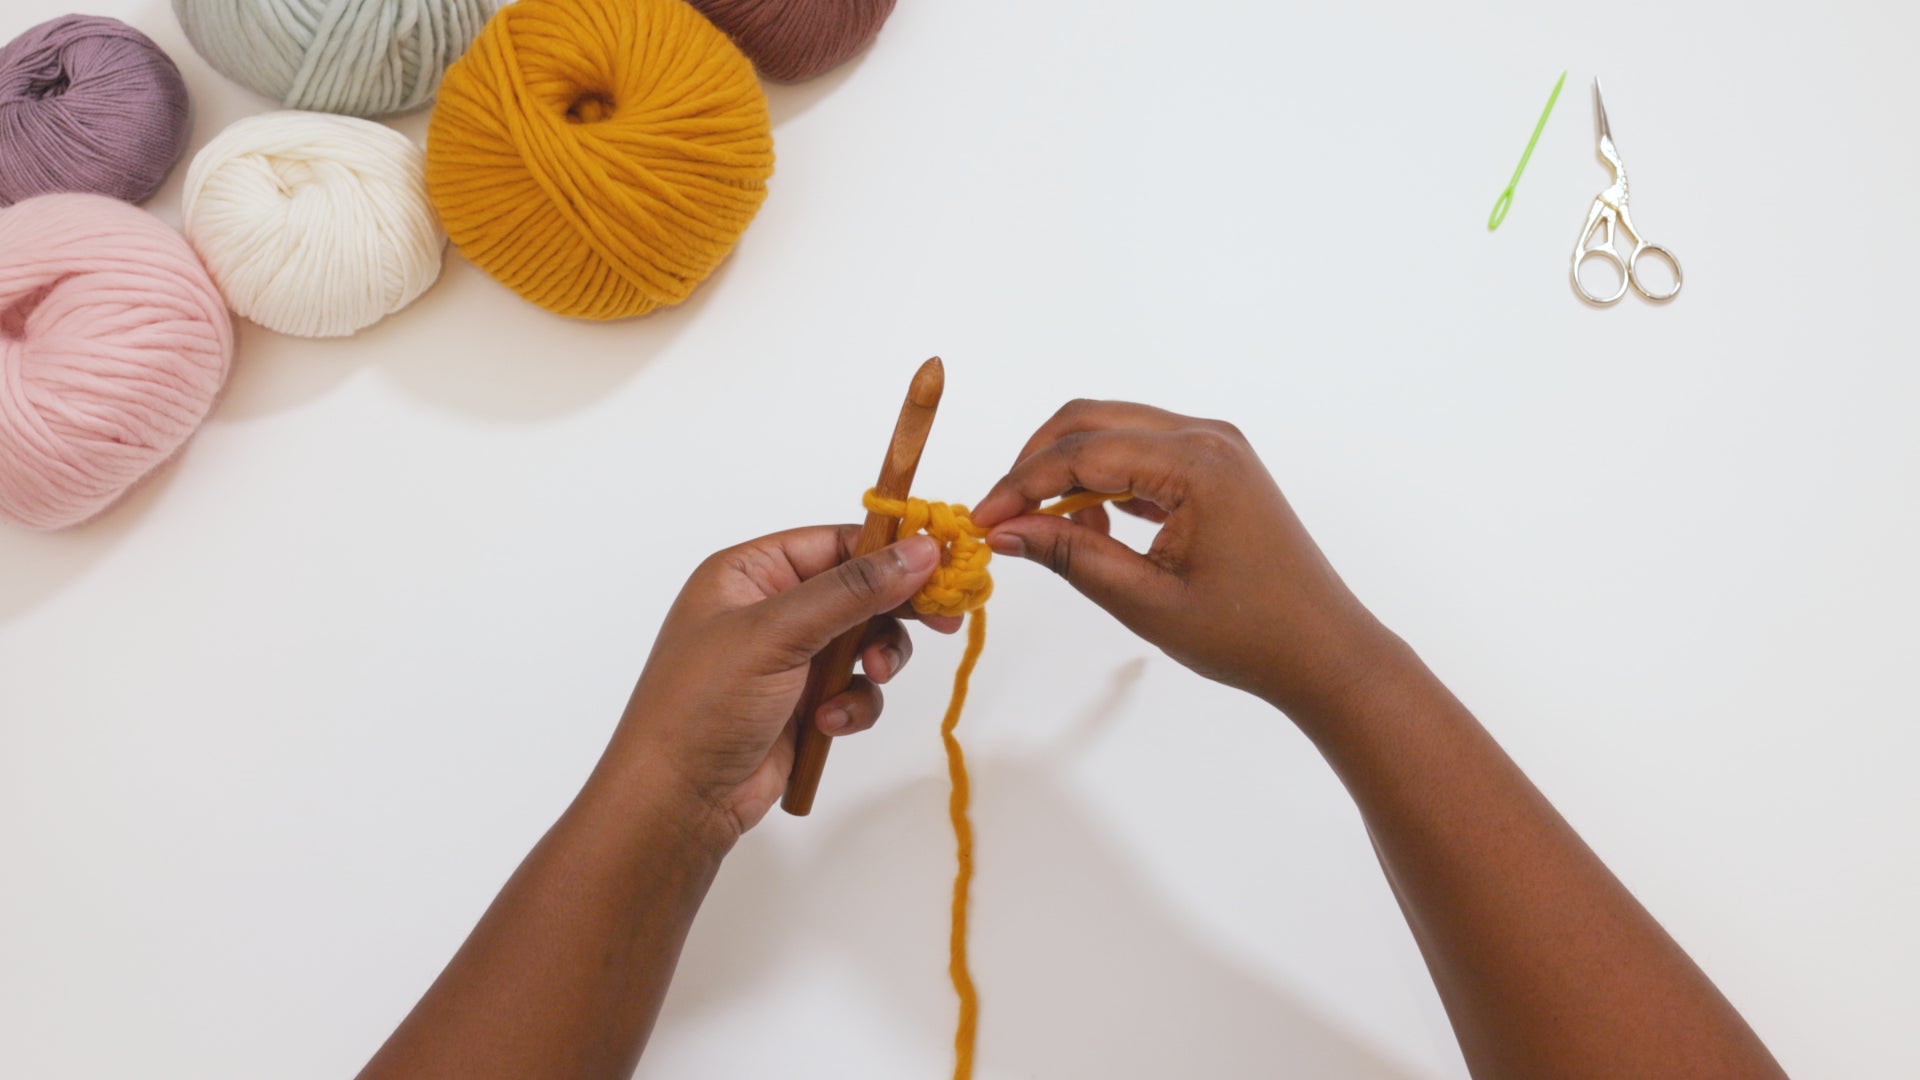 How To Single Crochet for Beginners (sc): With Right and Left Handed Videos